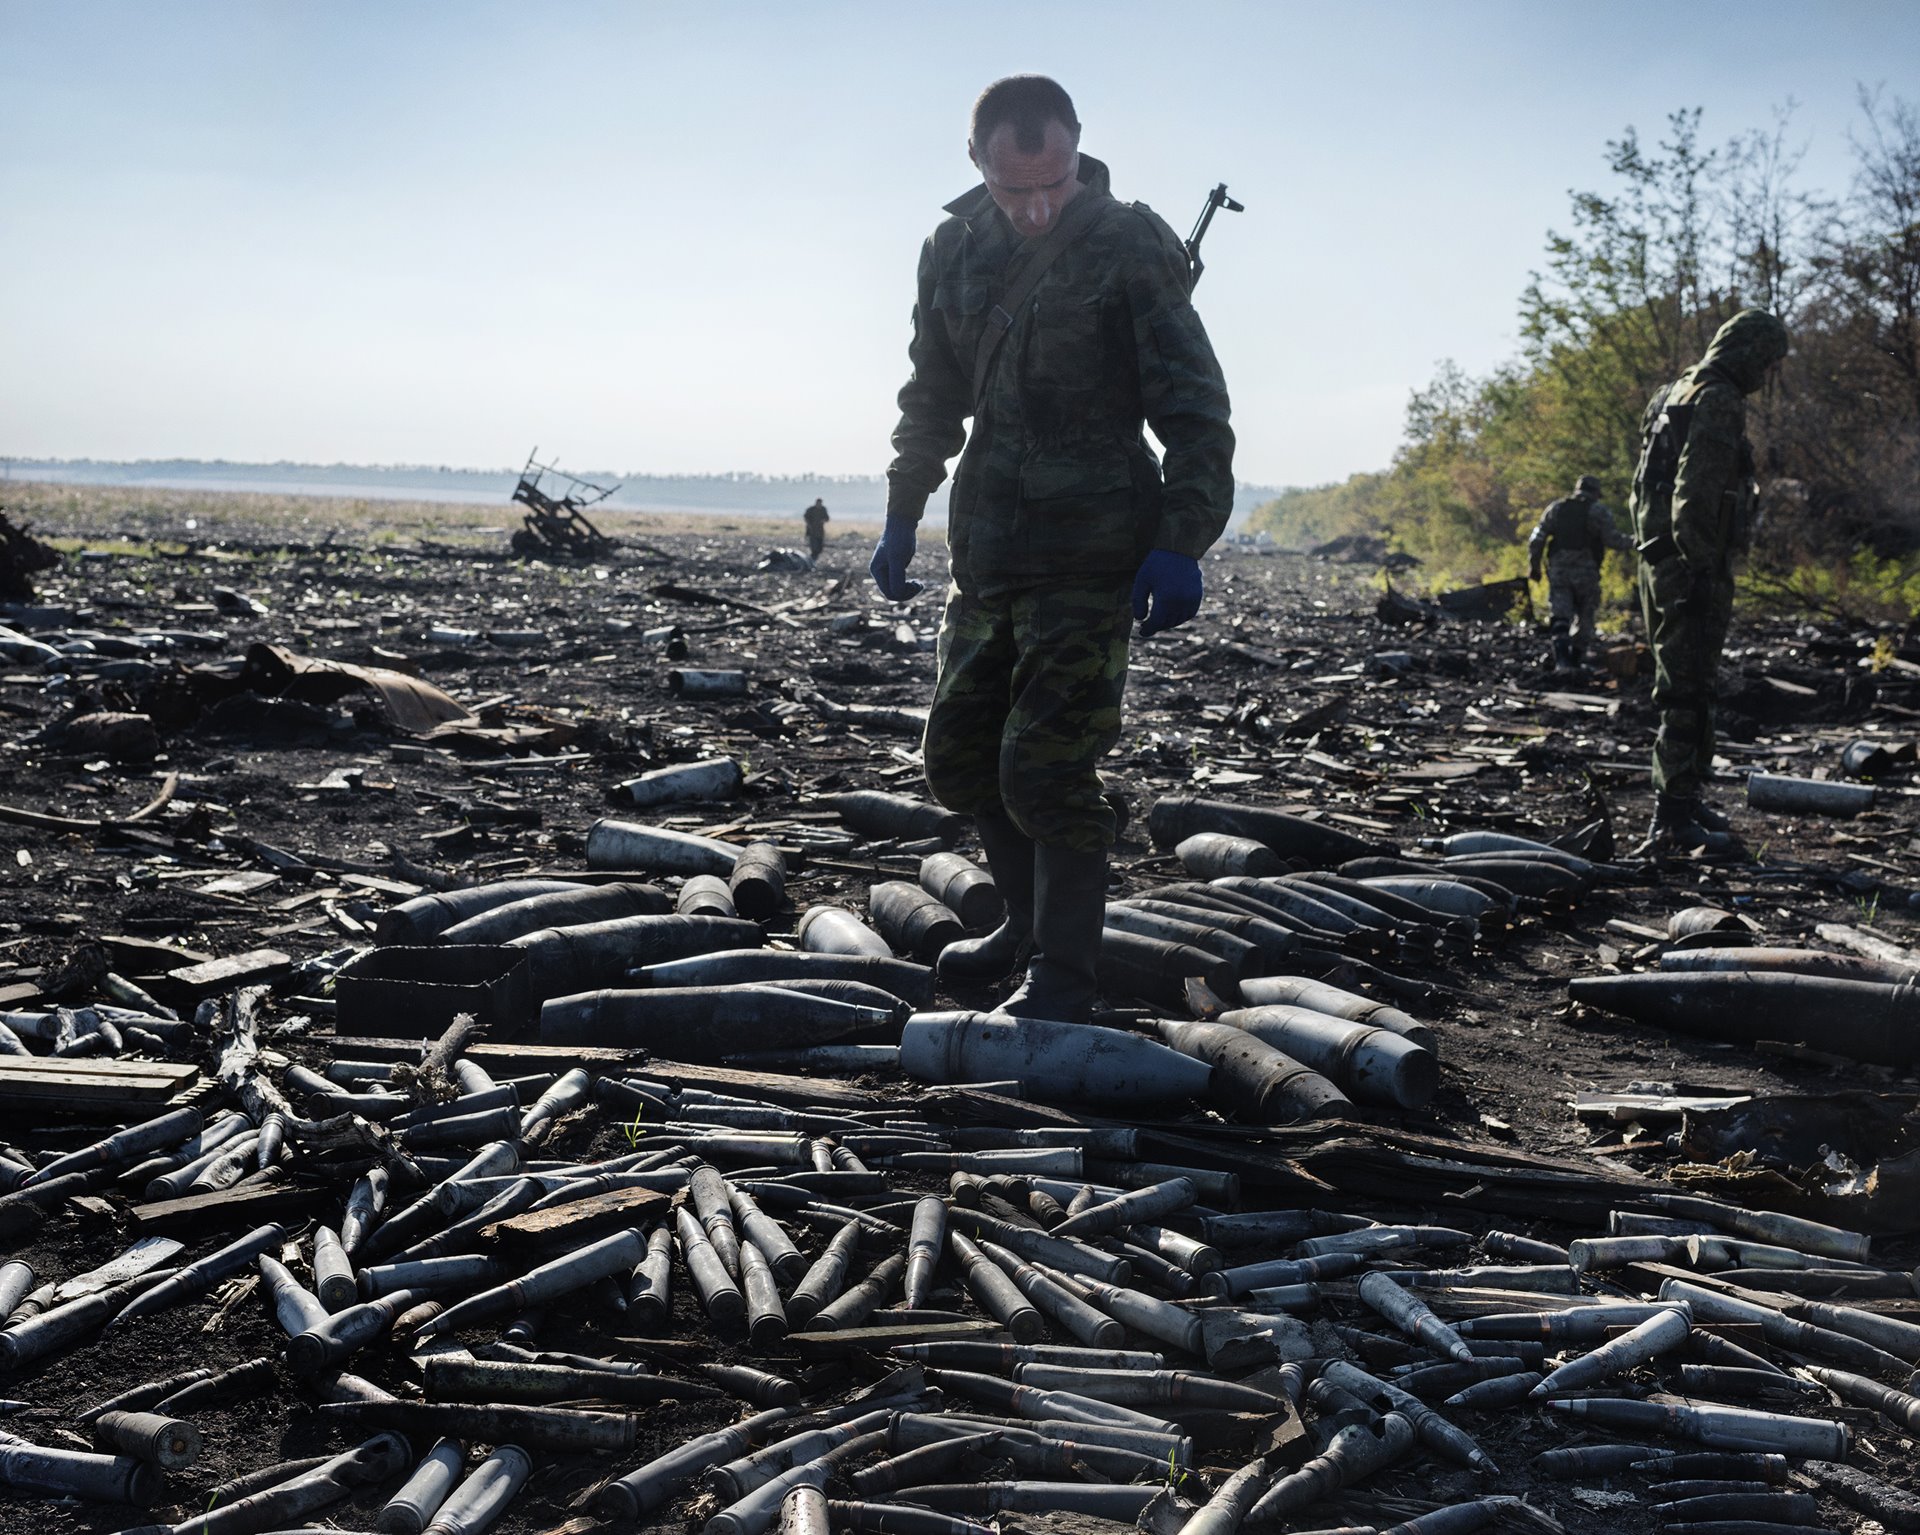 DNR fighters search a battlefield for any live ammunition left behind by Ukrainian troops after August clashes with separatists, in Amvrosiivka, Donbas, Ukraine.